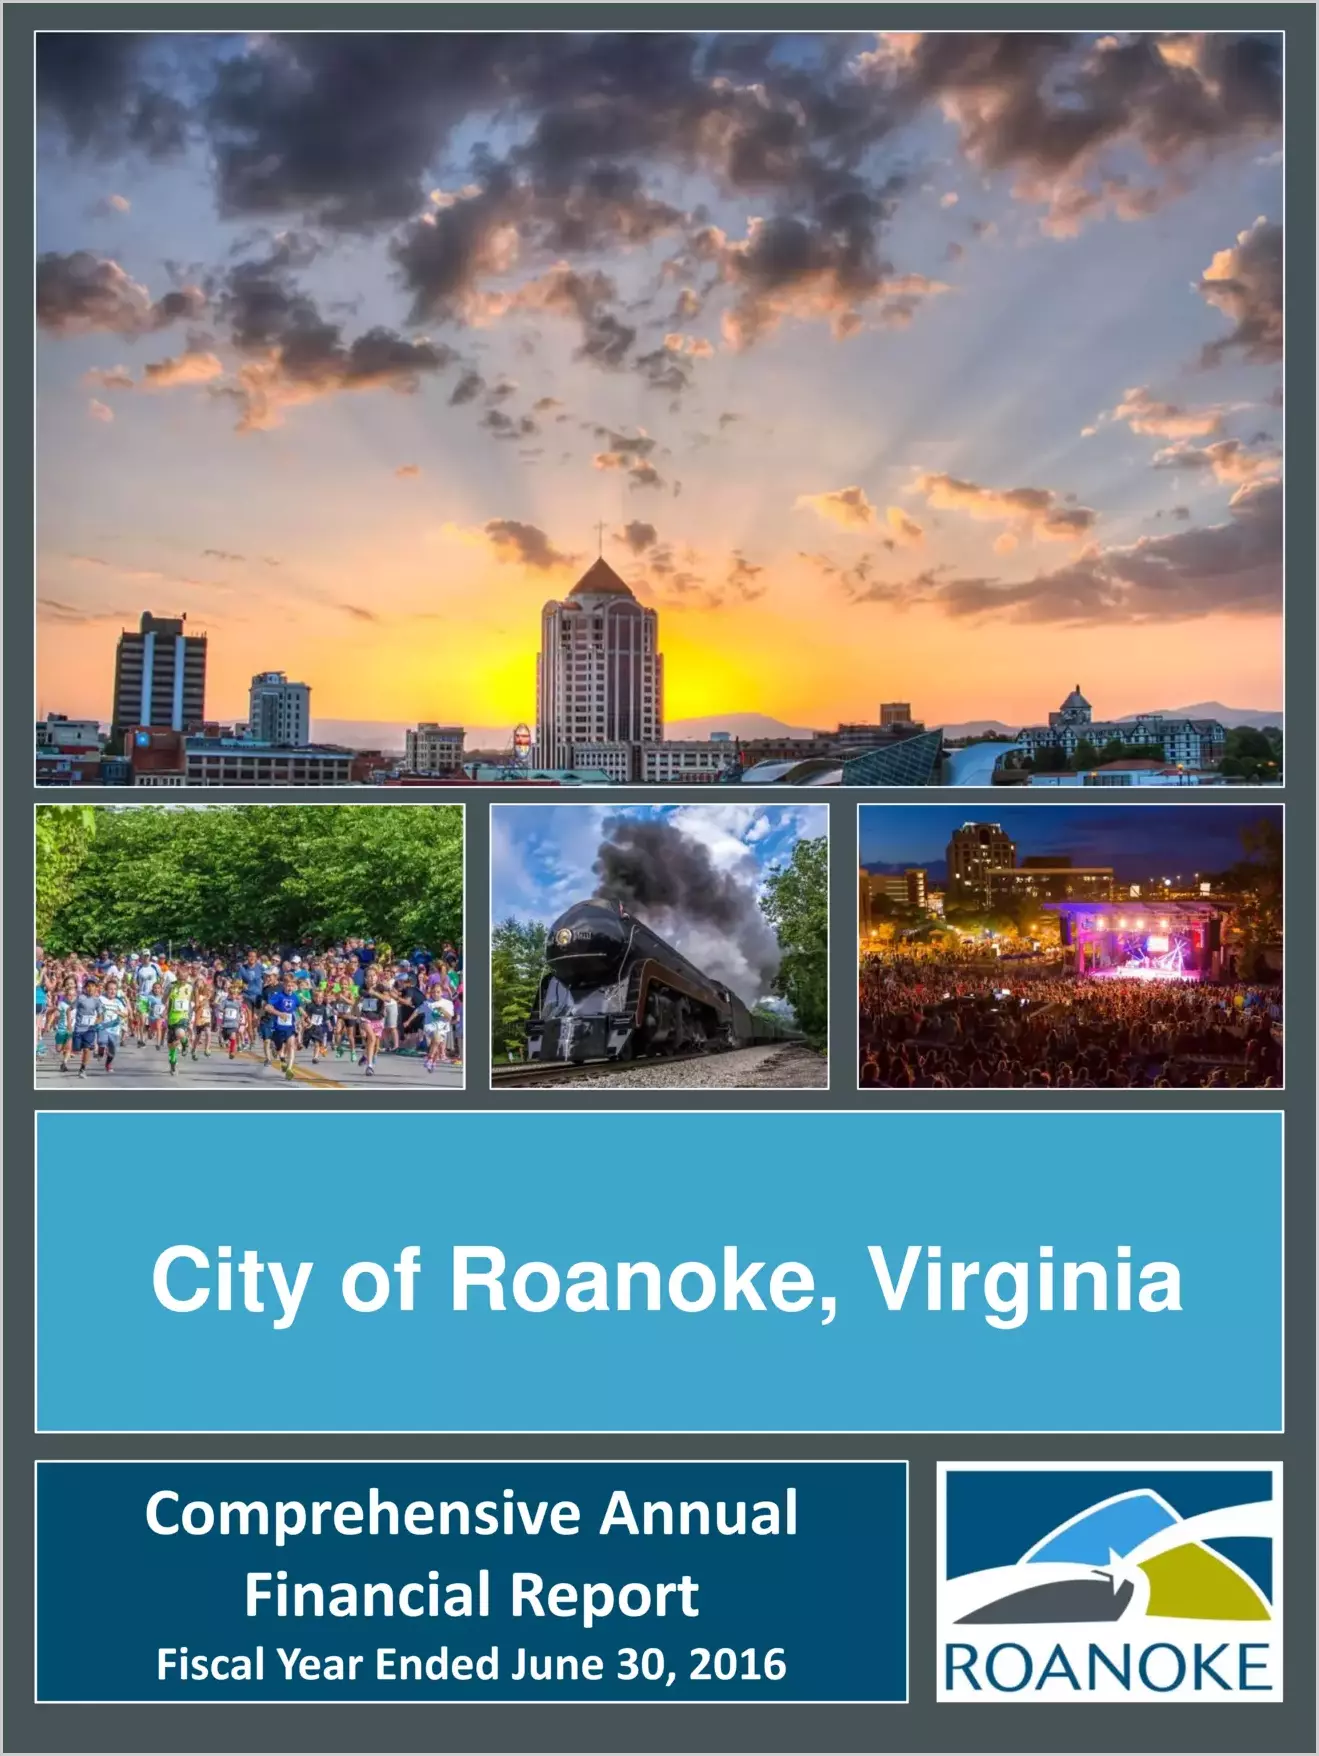 2016 Annual Financial Report for City of Roanoke